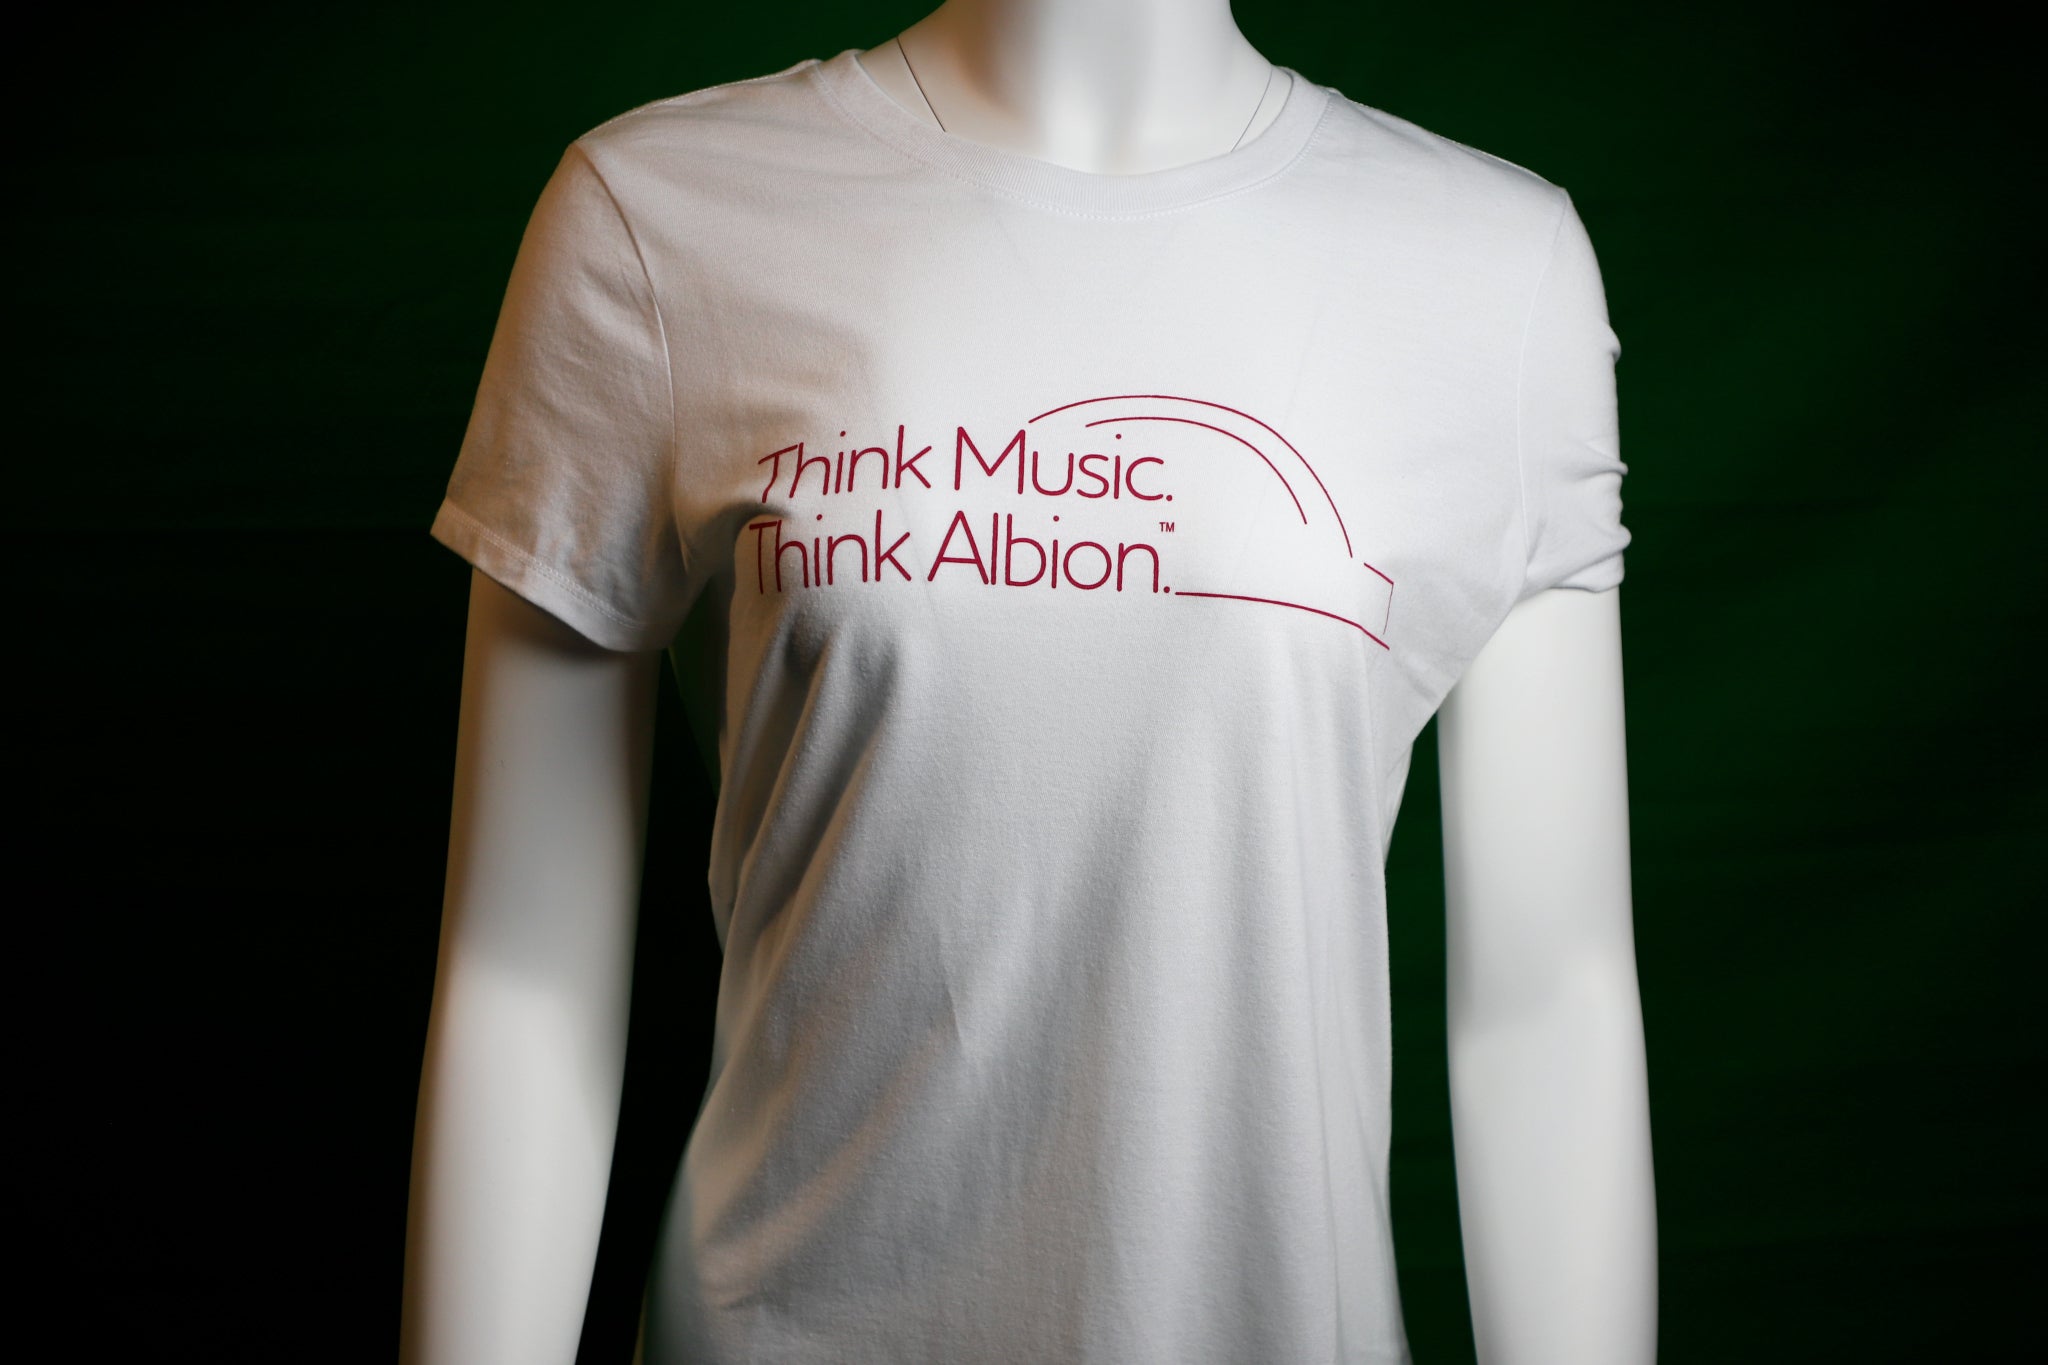 Albion-Think Music. Think Albion. Shirt